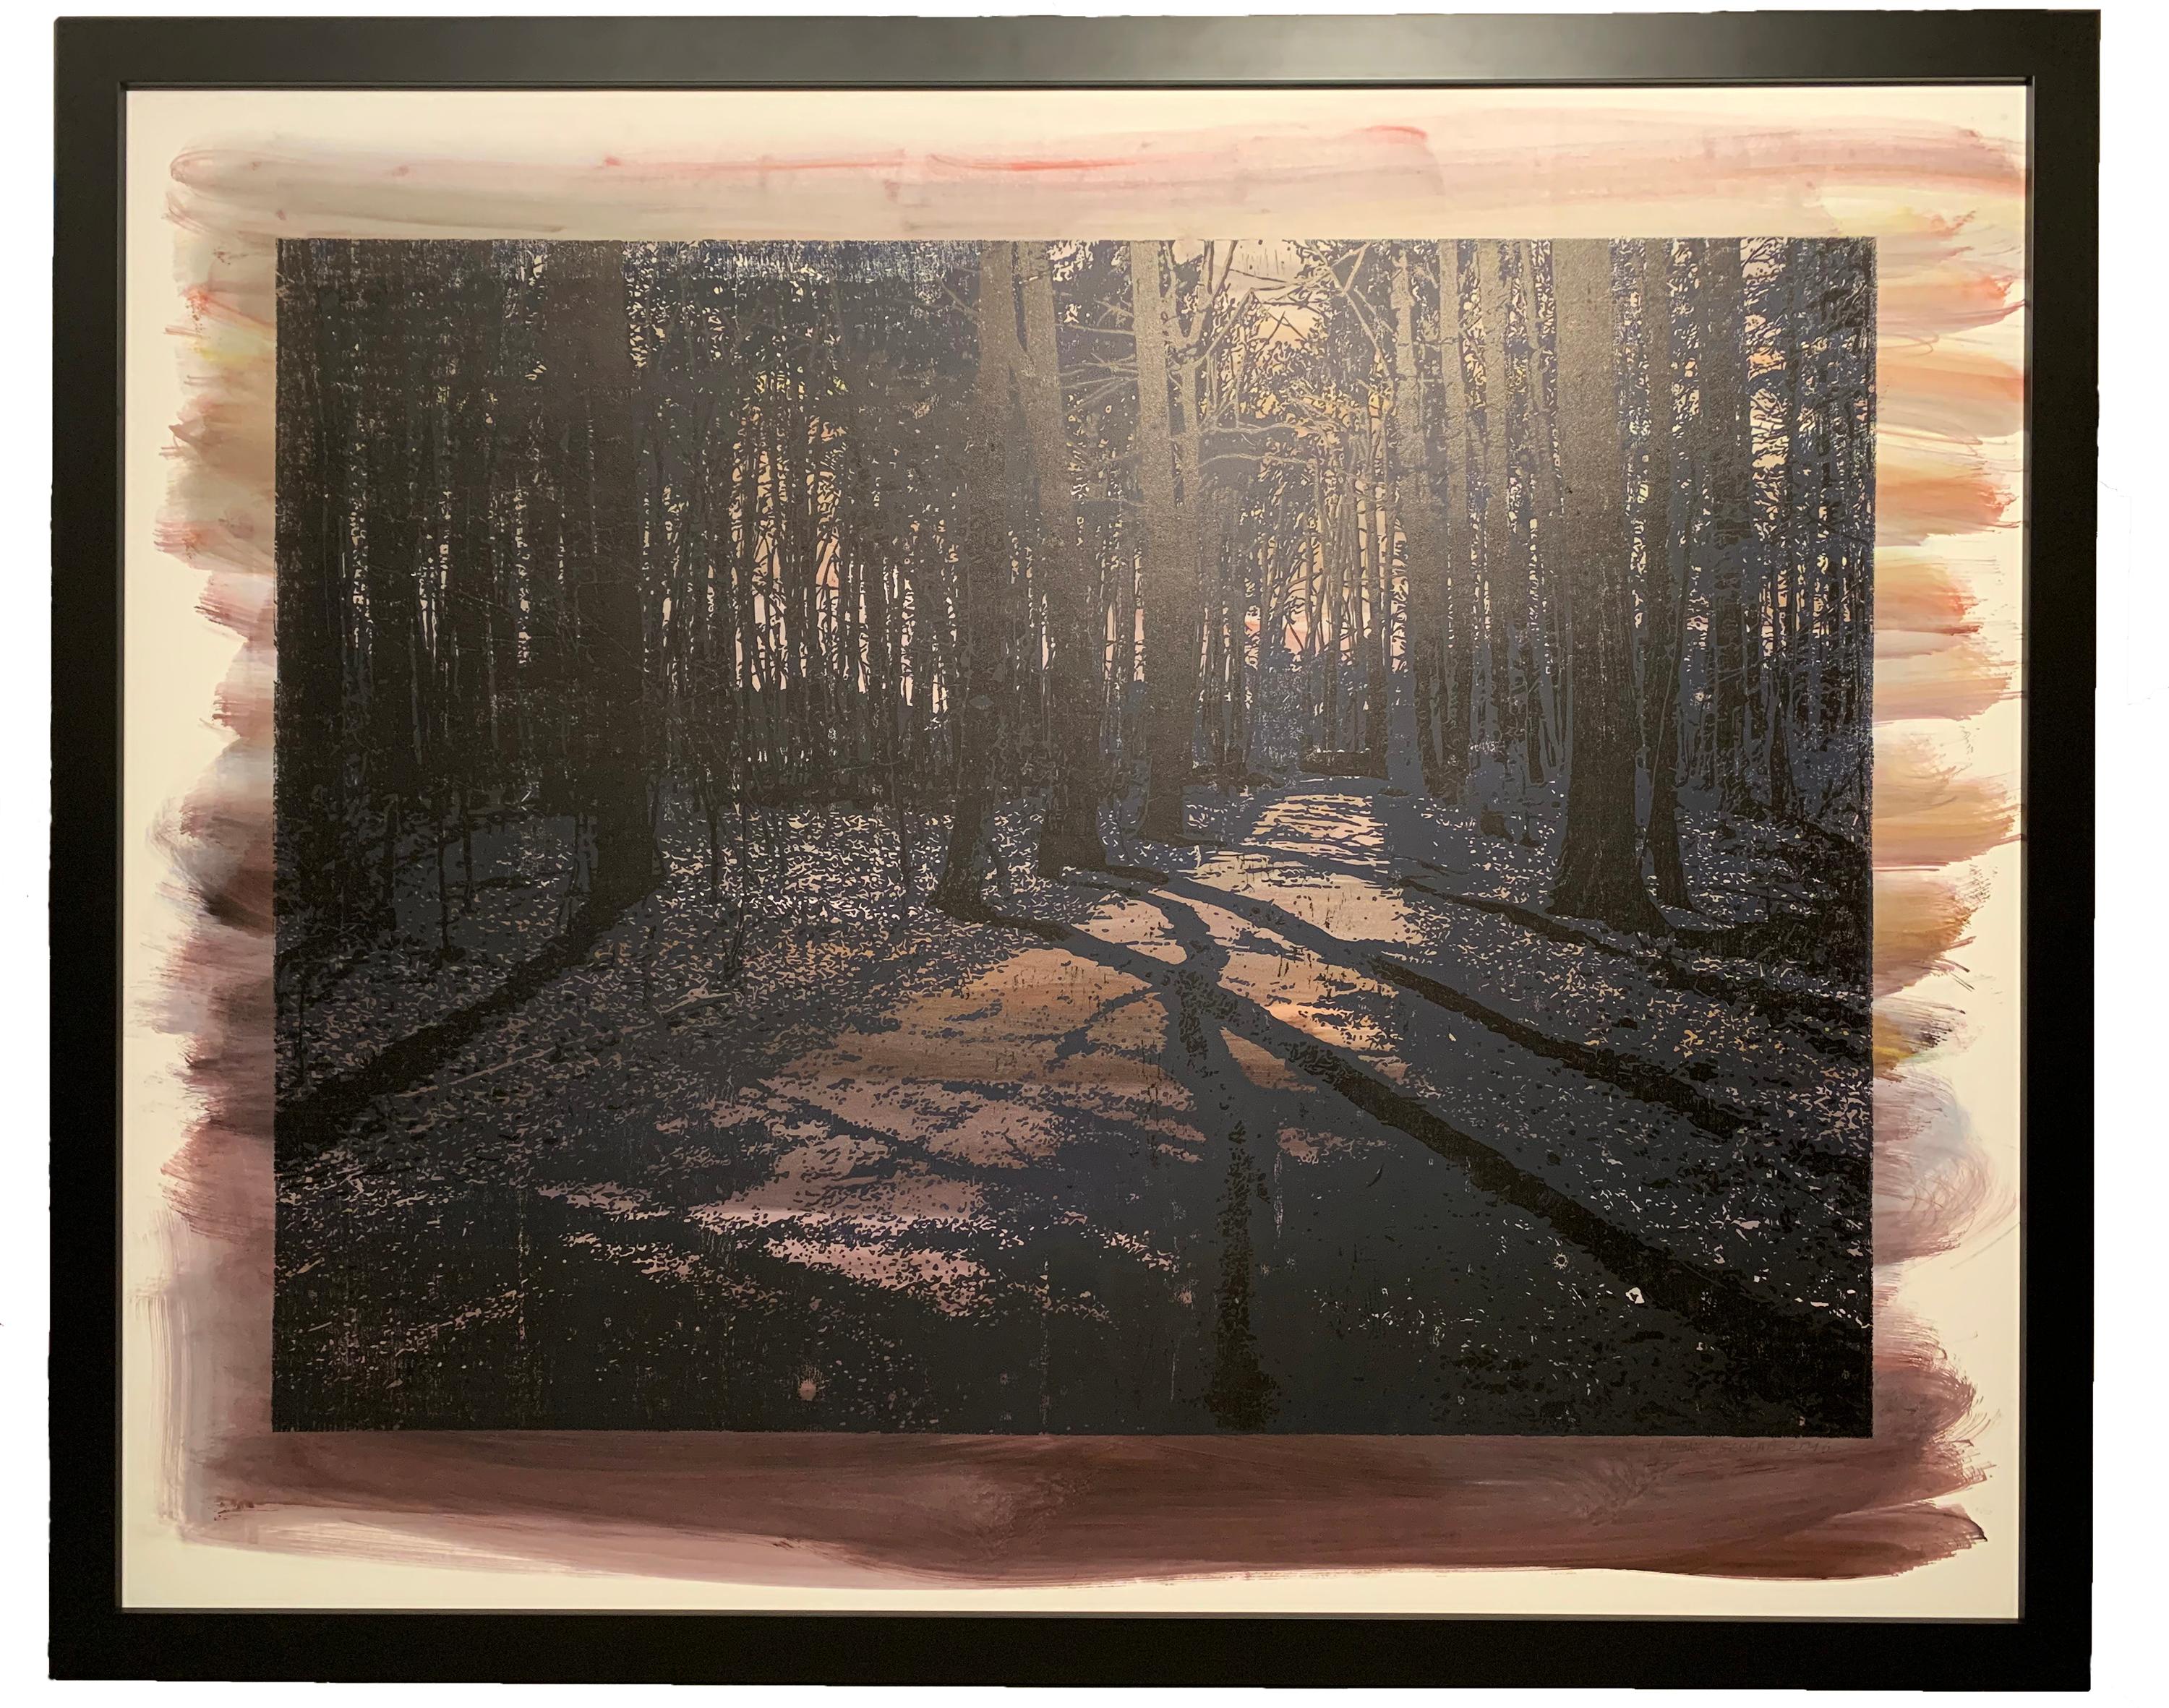 Forest in Purple - Wooden engraved panel - Etched and hand printed - Framed - Mixed Media Art by Natanel Gluska